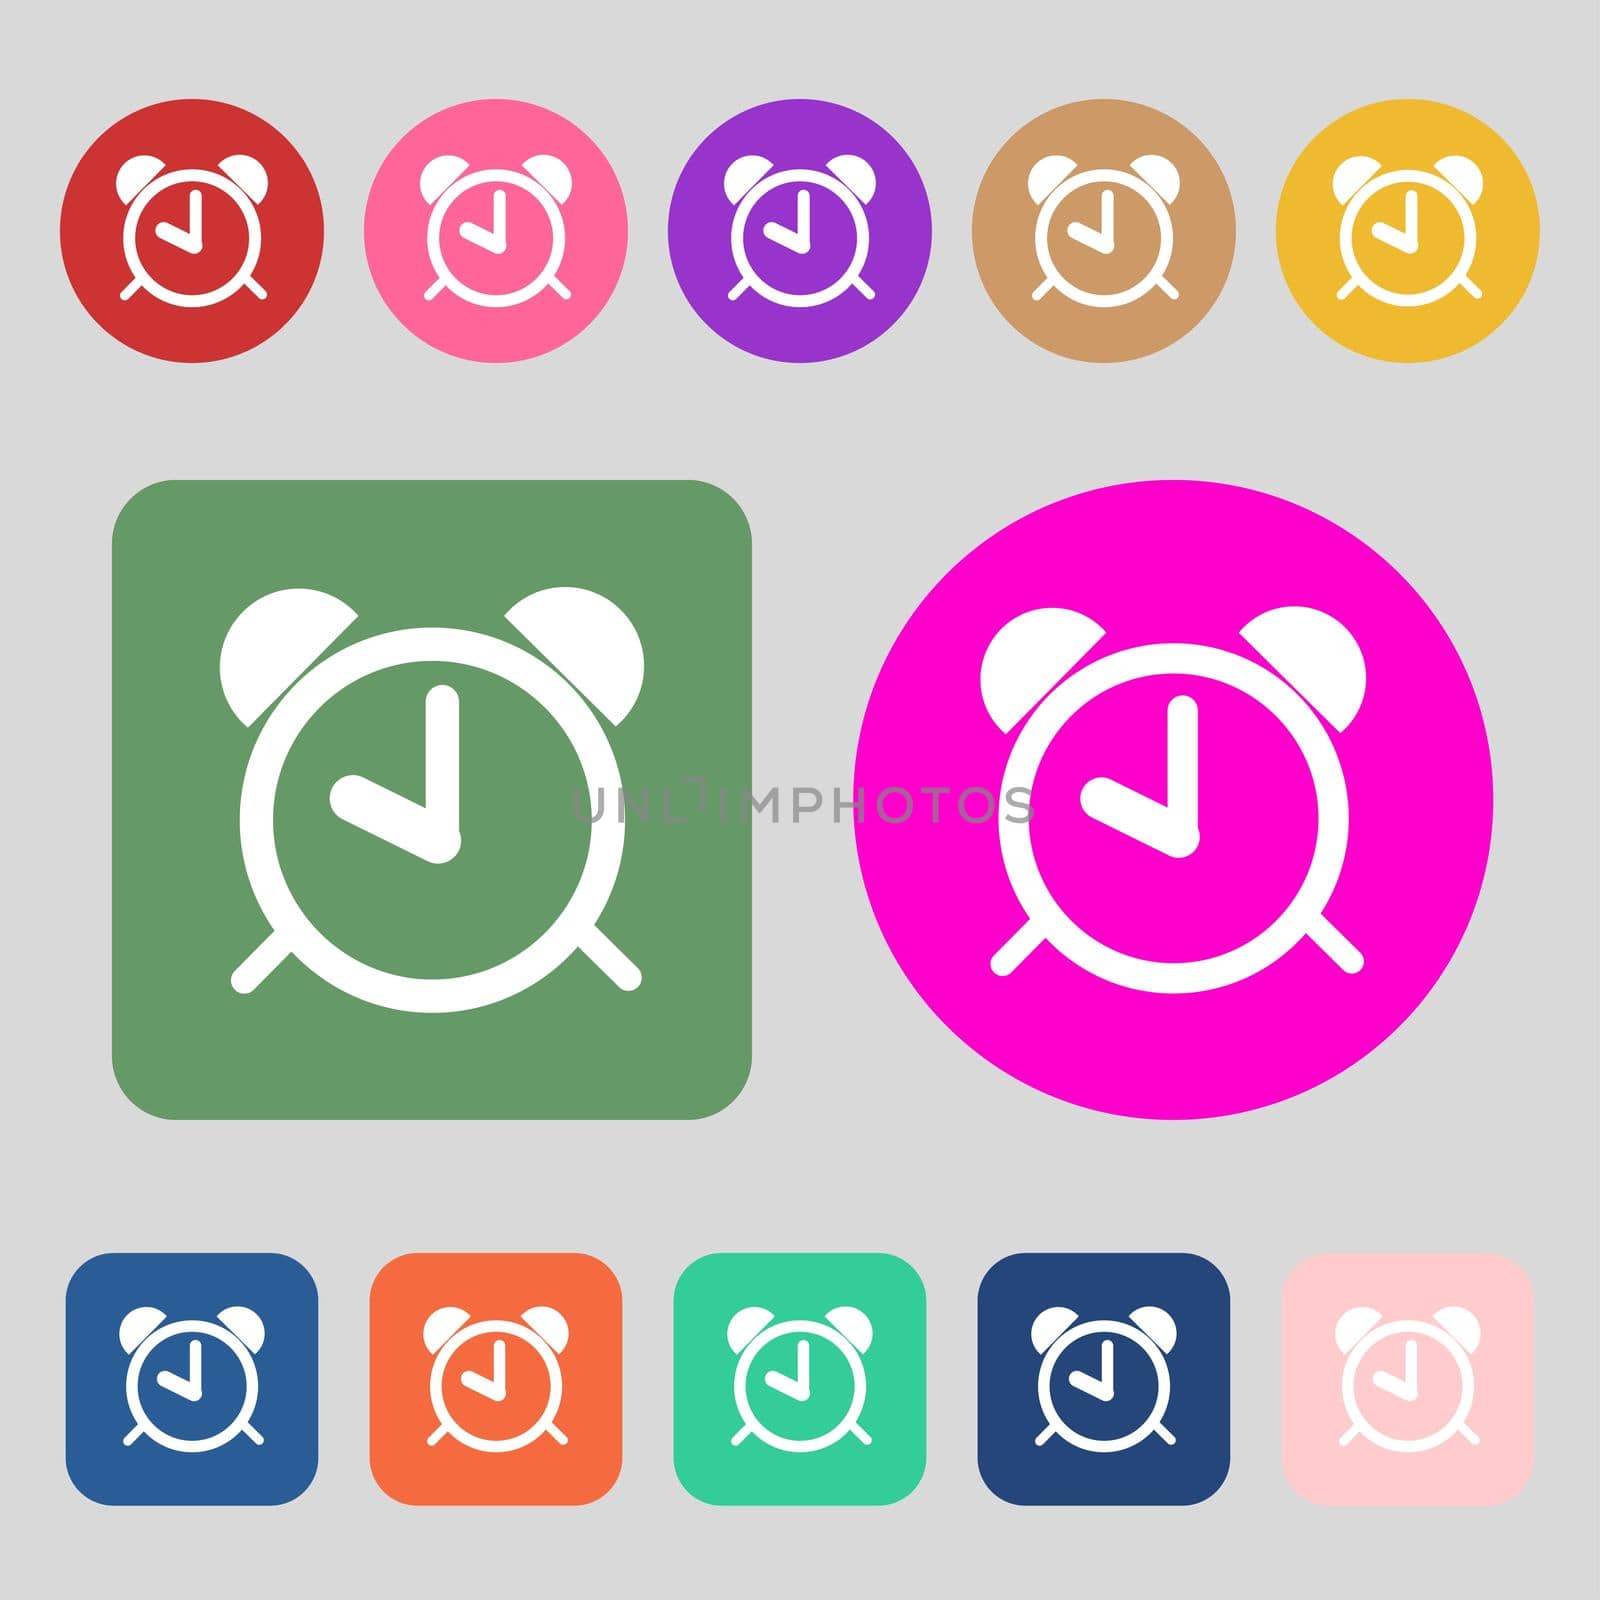 Alarm clock sign icon. Wake up alarm symbol. 12 colored buttons. Flat design.  by serhii_lohvyniuk